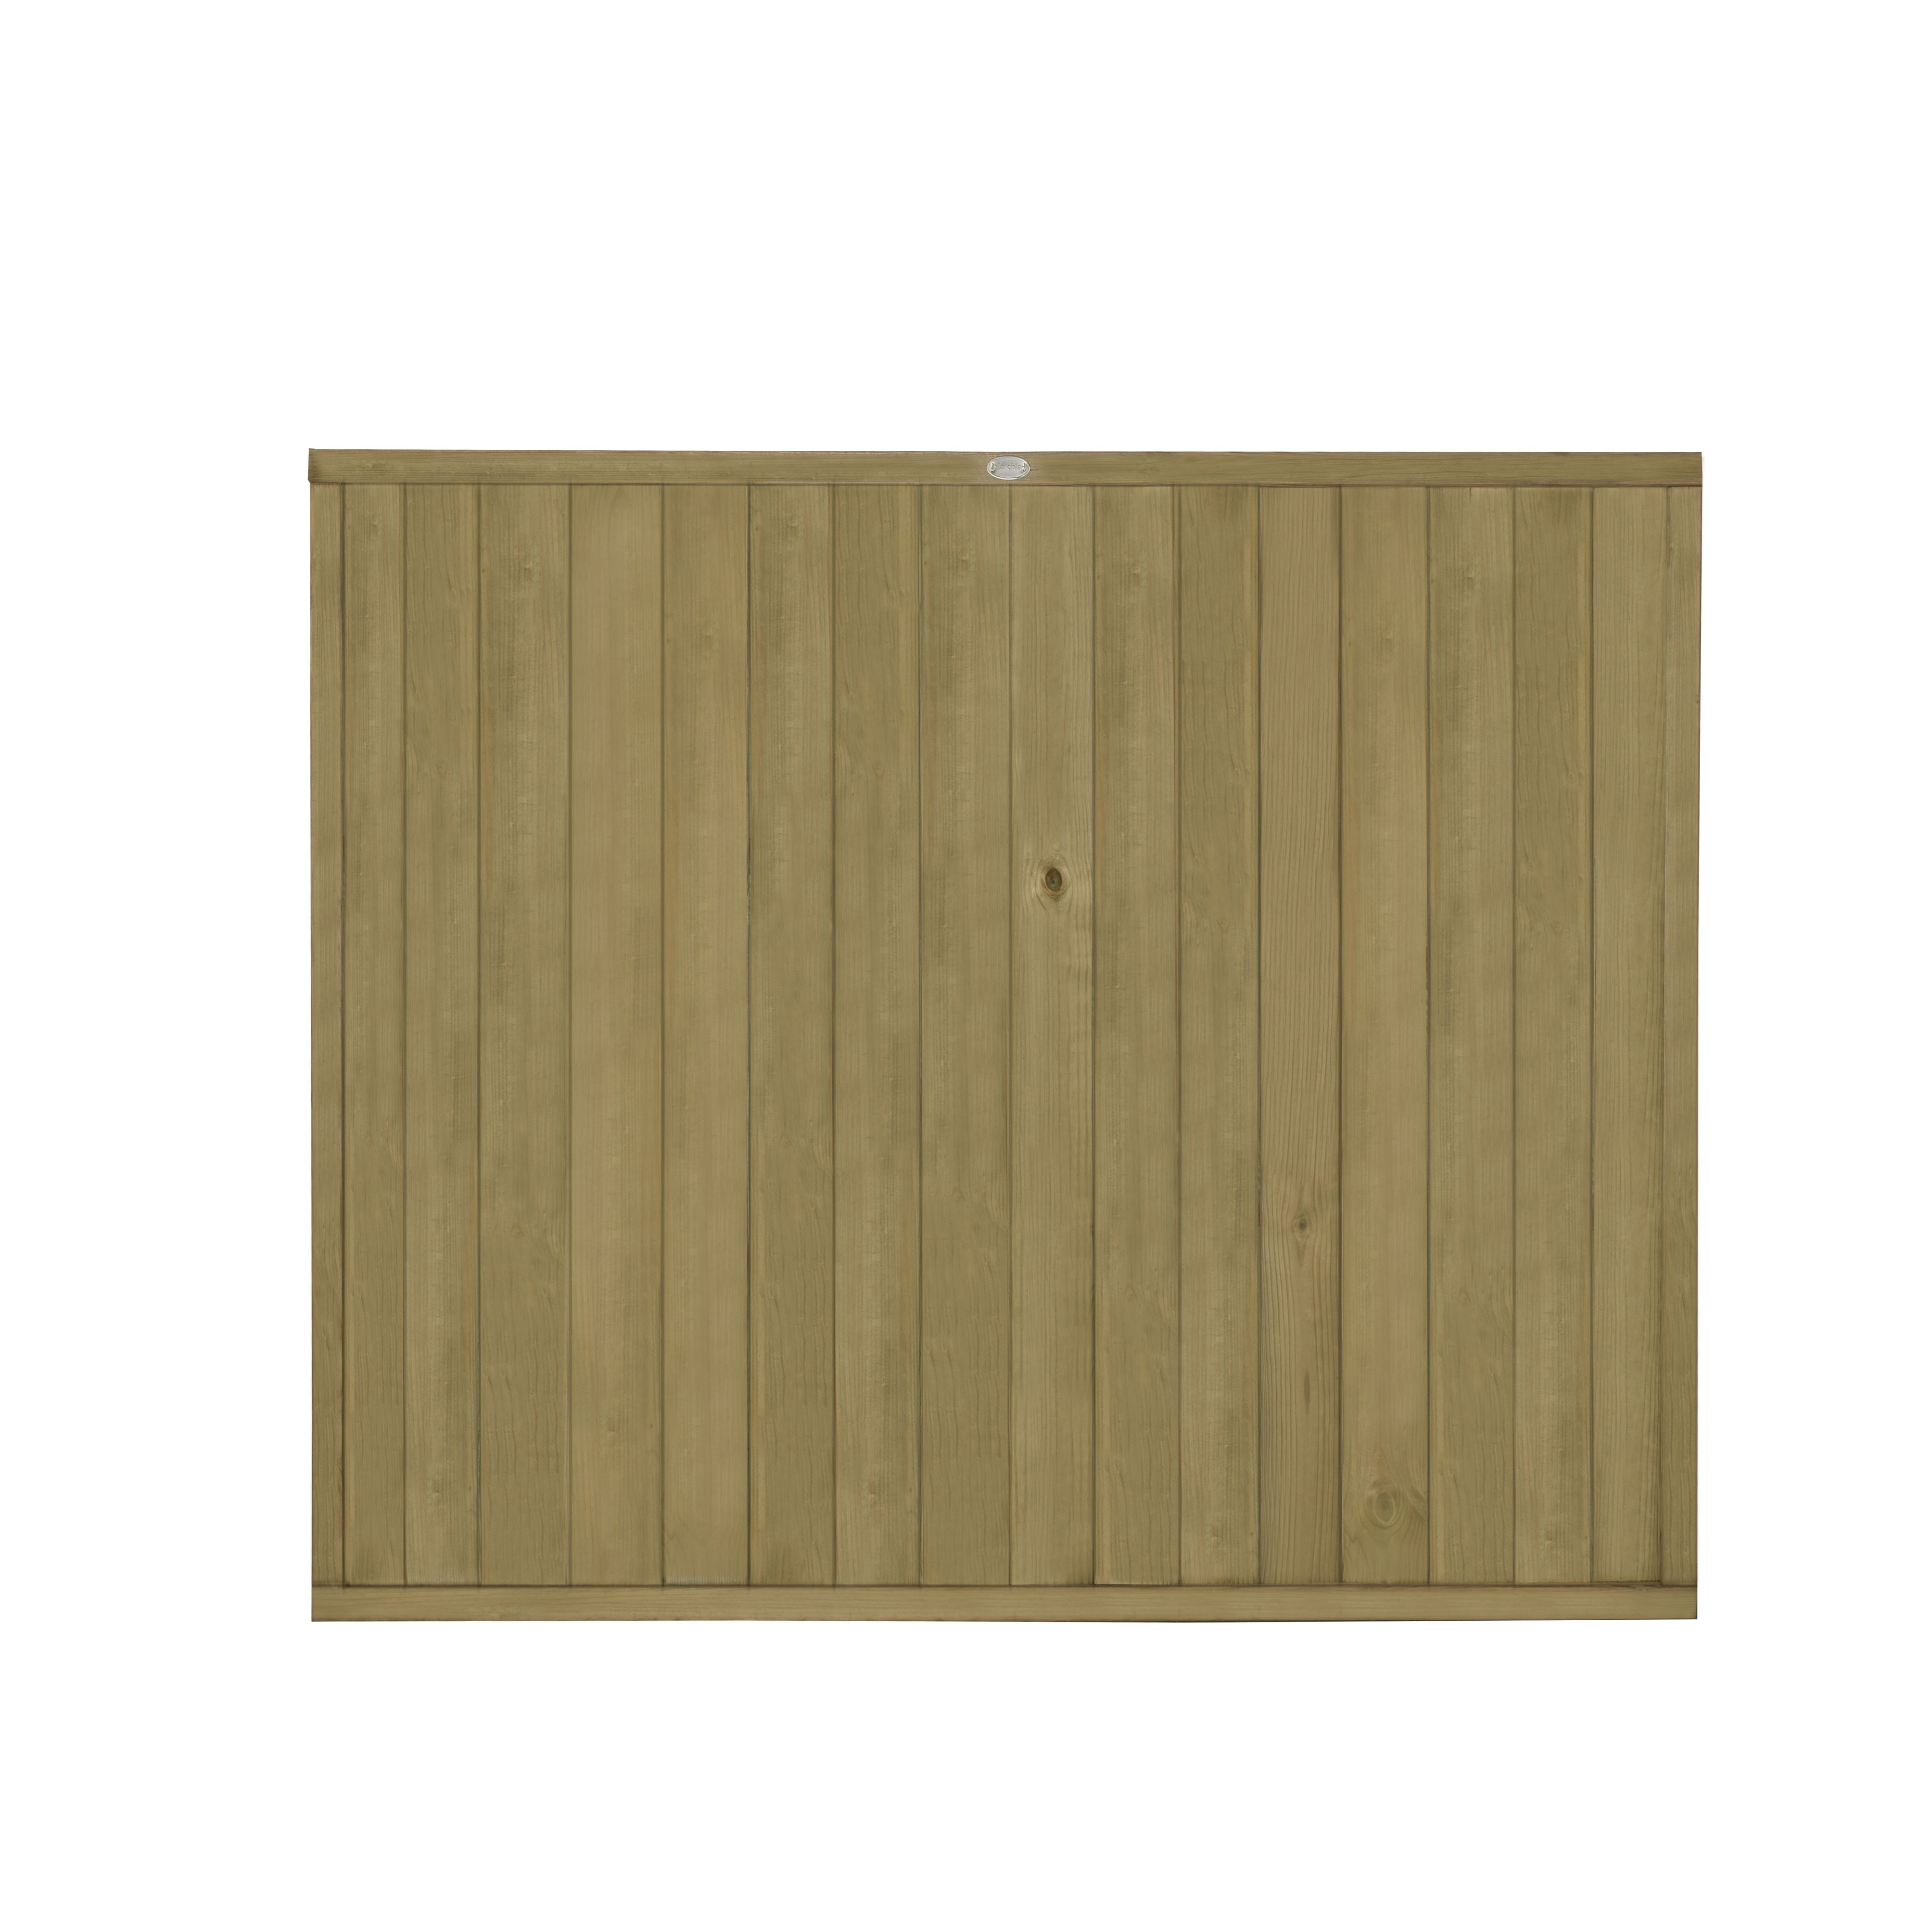 Image of Forest Garden Pressure Treated Tongue & Groove Vertical Fence Panel - 6 x 5ft - Pack of 4